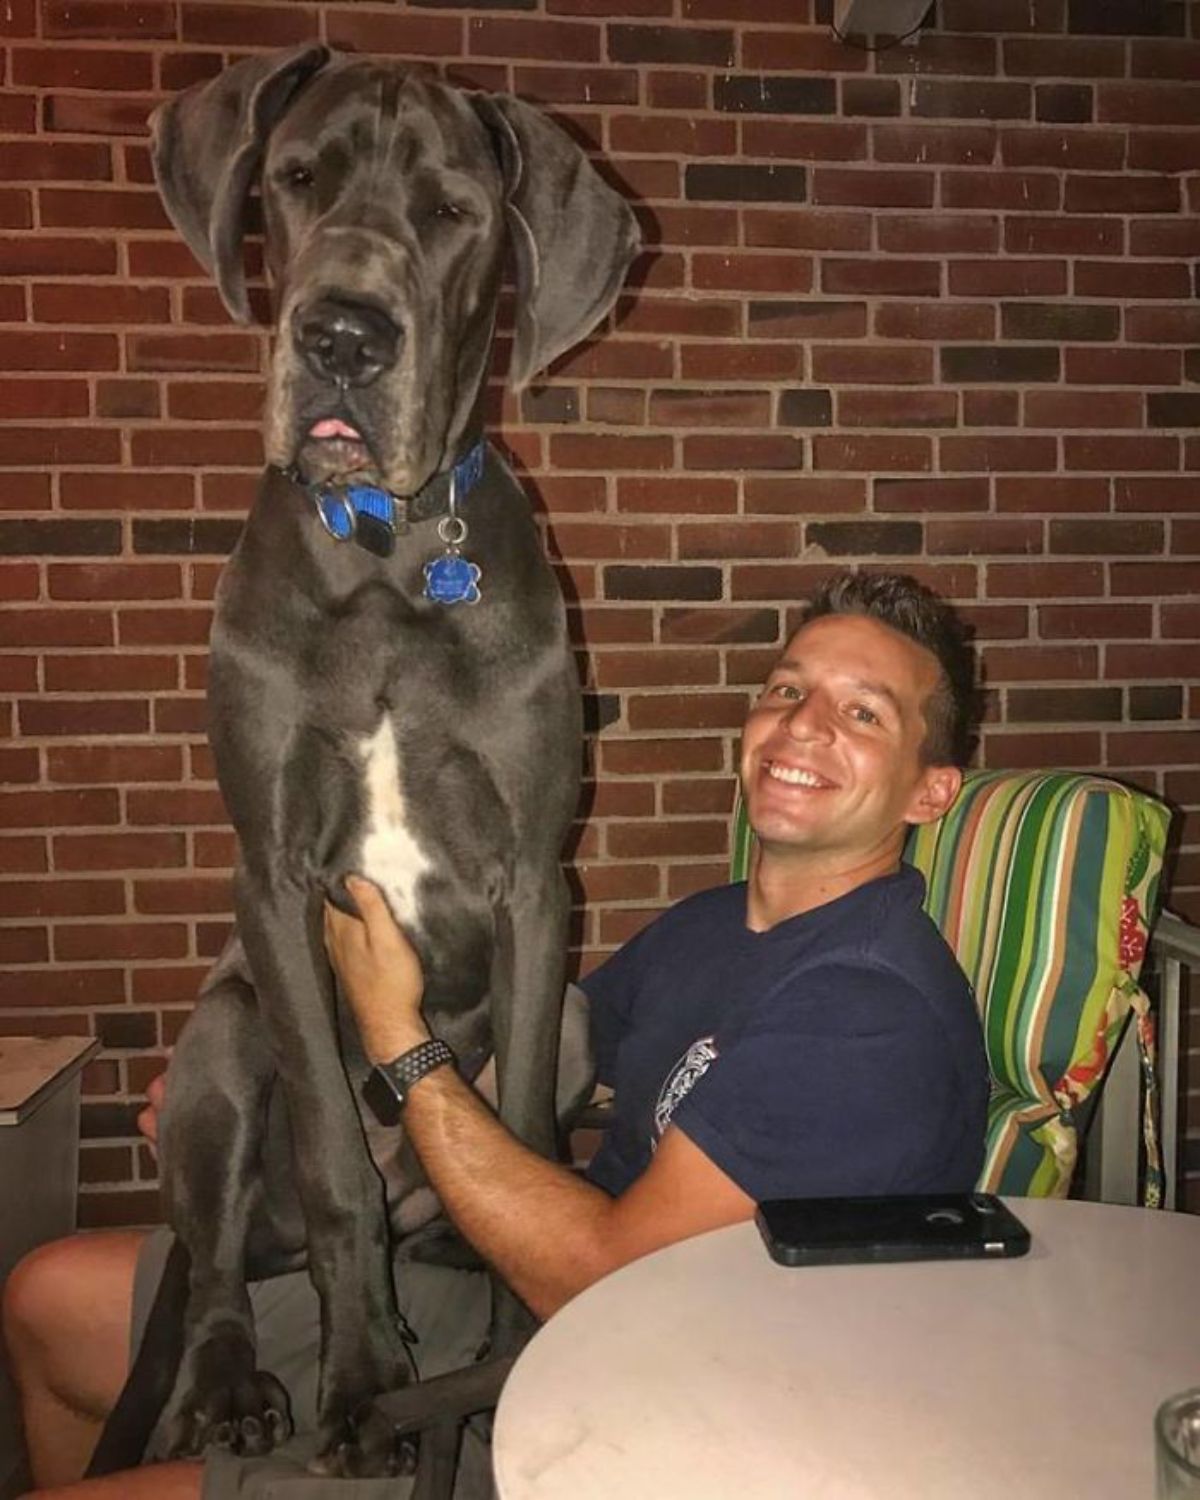 grey and white great dane puppy sitting on a man's lap